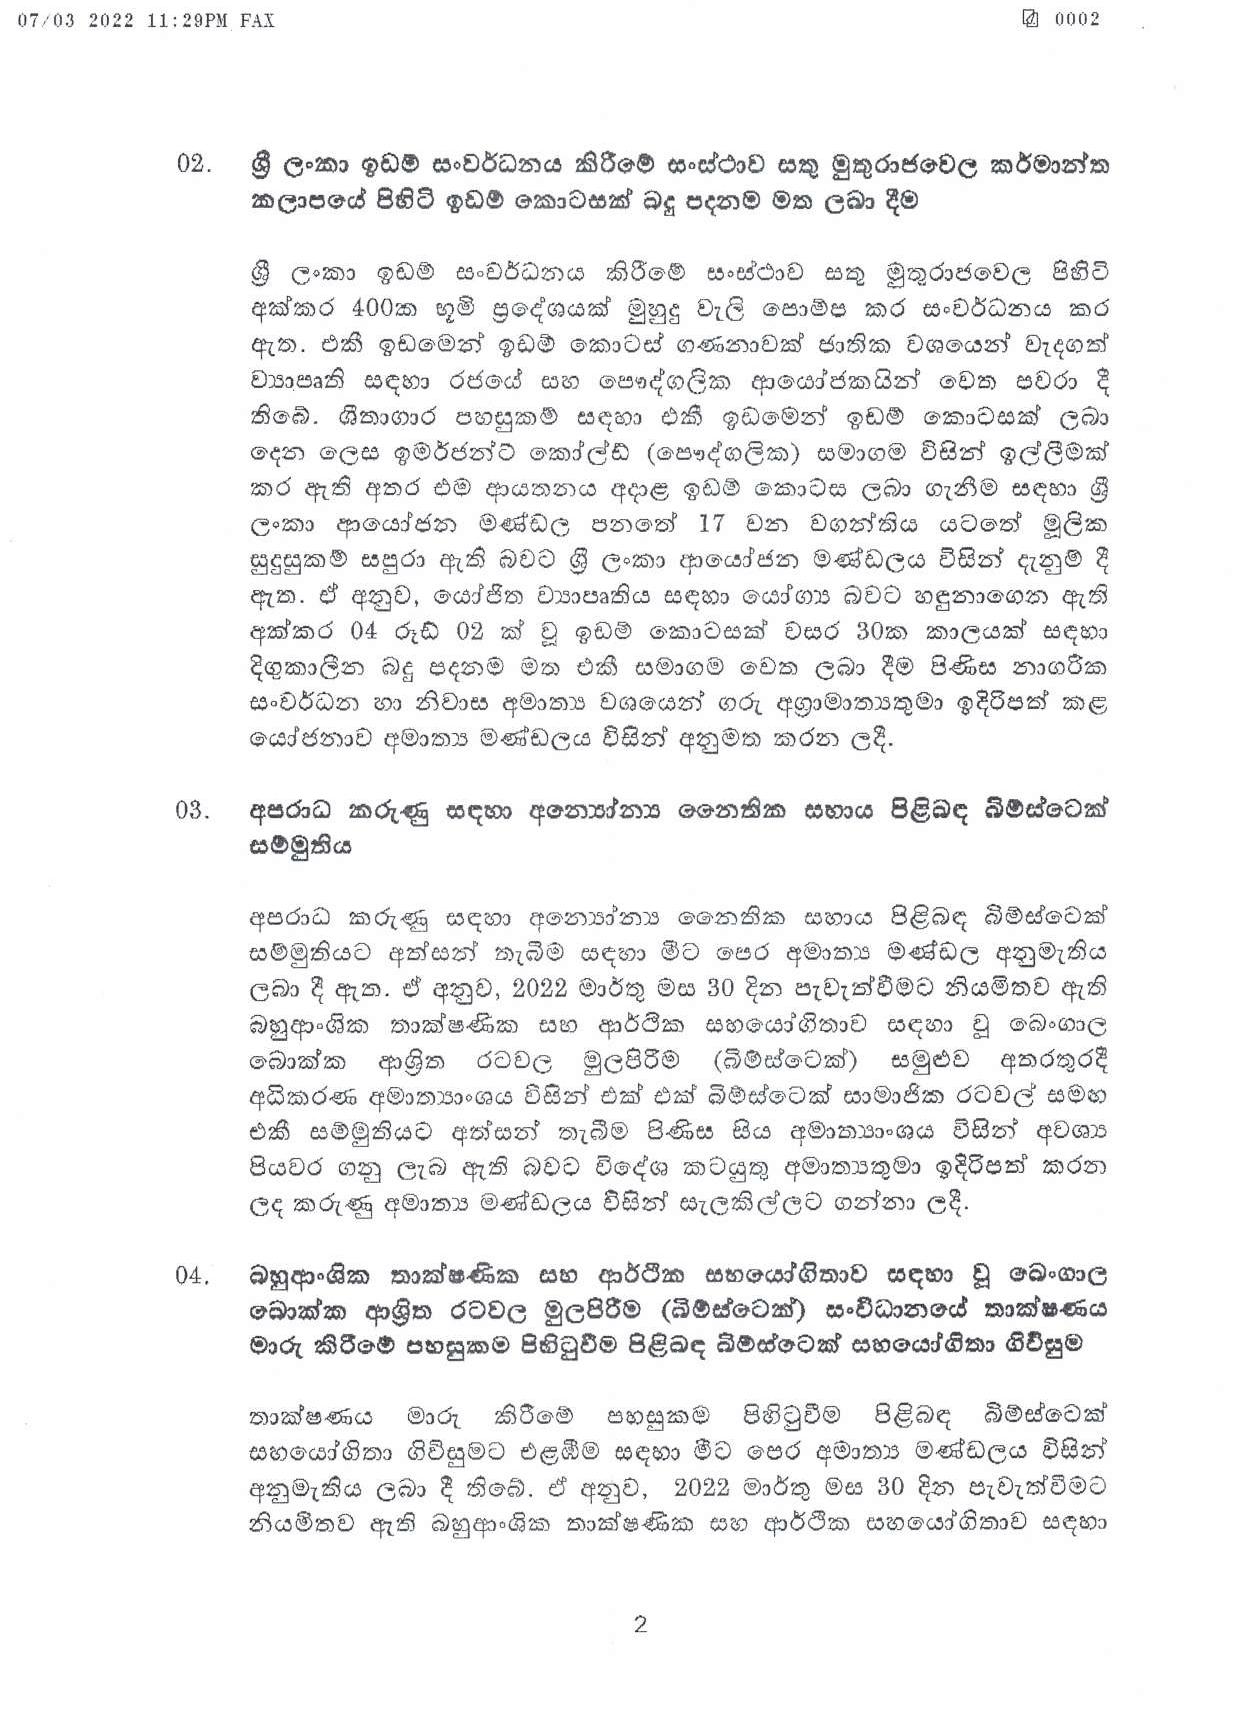 Cabinet Decision on 07.03.2022 page 002